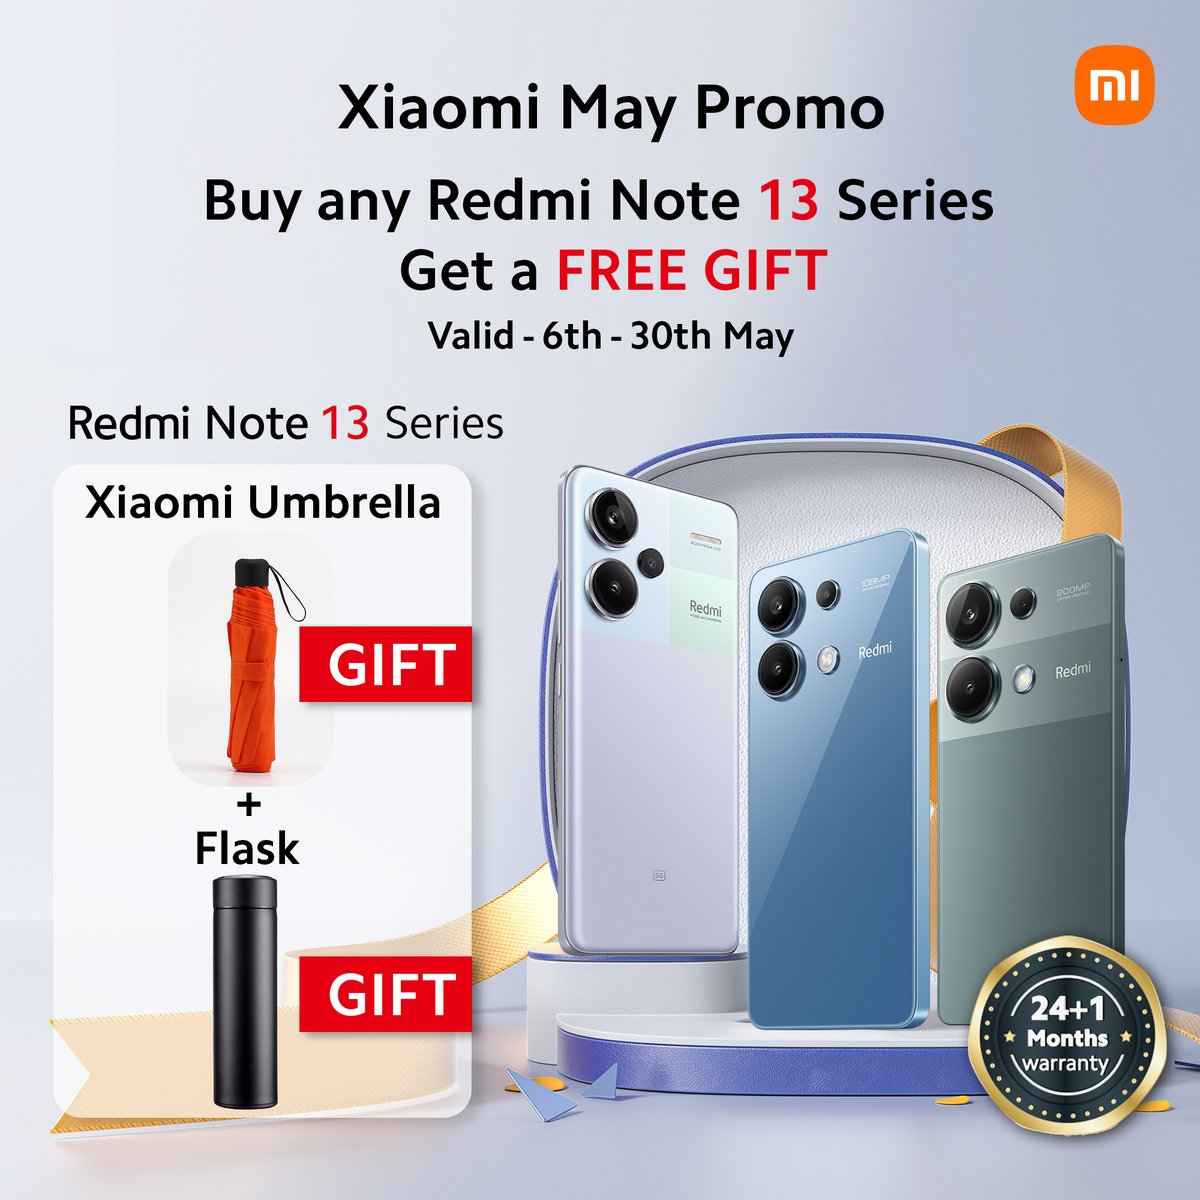 The Xiaomi May Promos are not done yet!! Buy any Redmi Note 13 series and get a free gift!! Offer valid from 6th May - 30th May. @xiaomi_kenya #XiaomiMayPromo #XiaomiMaySalesPromo